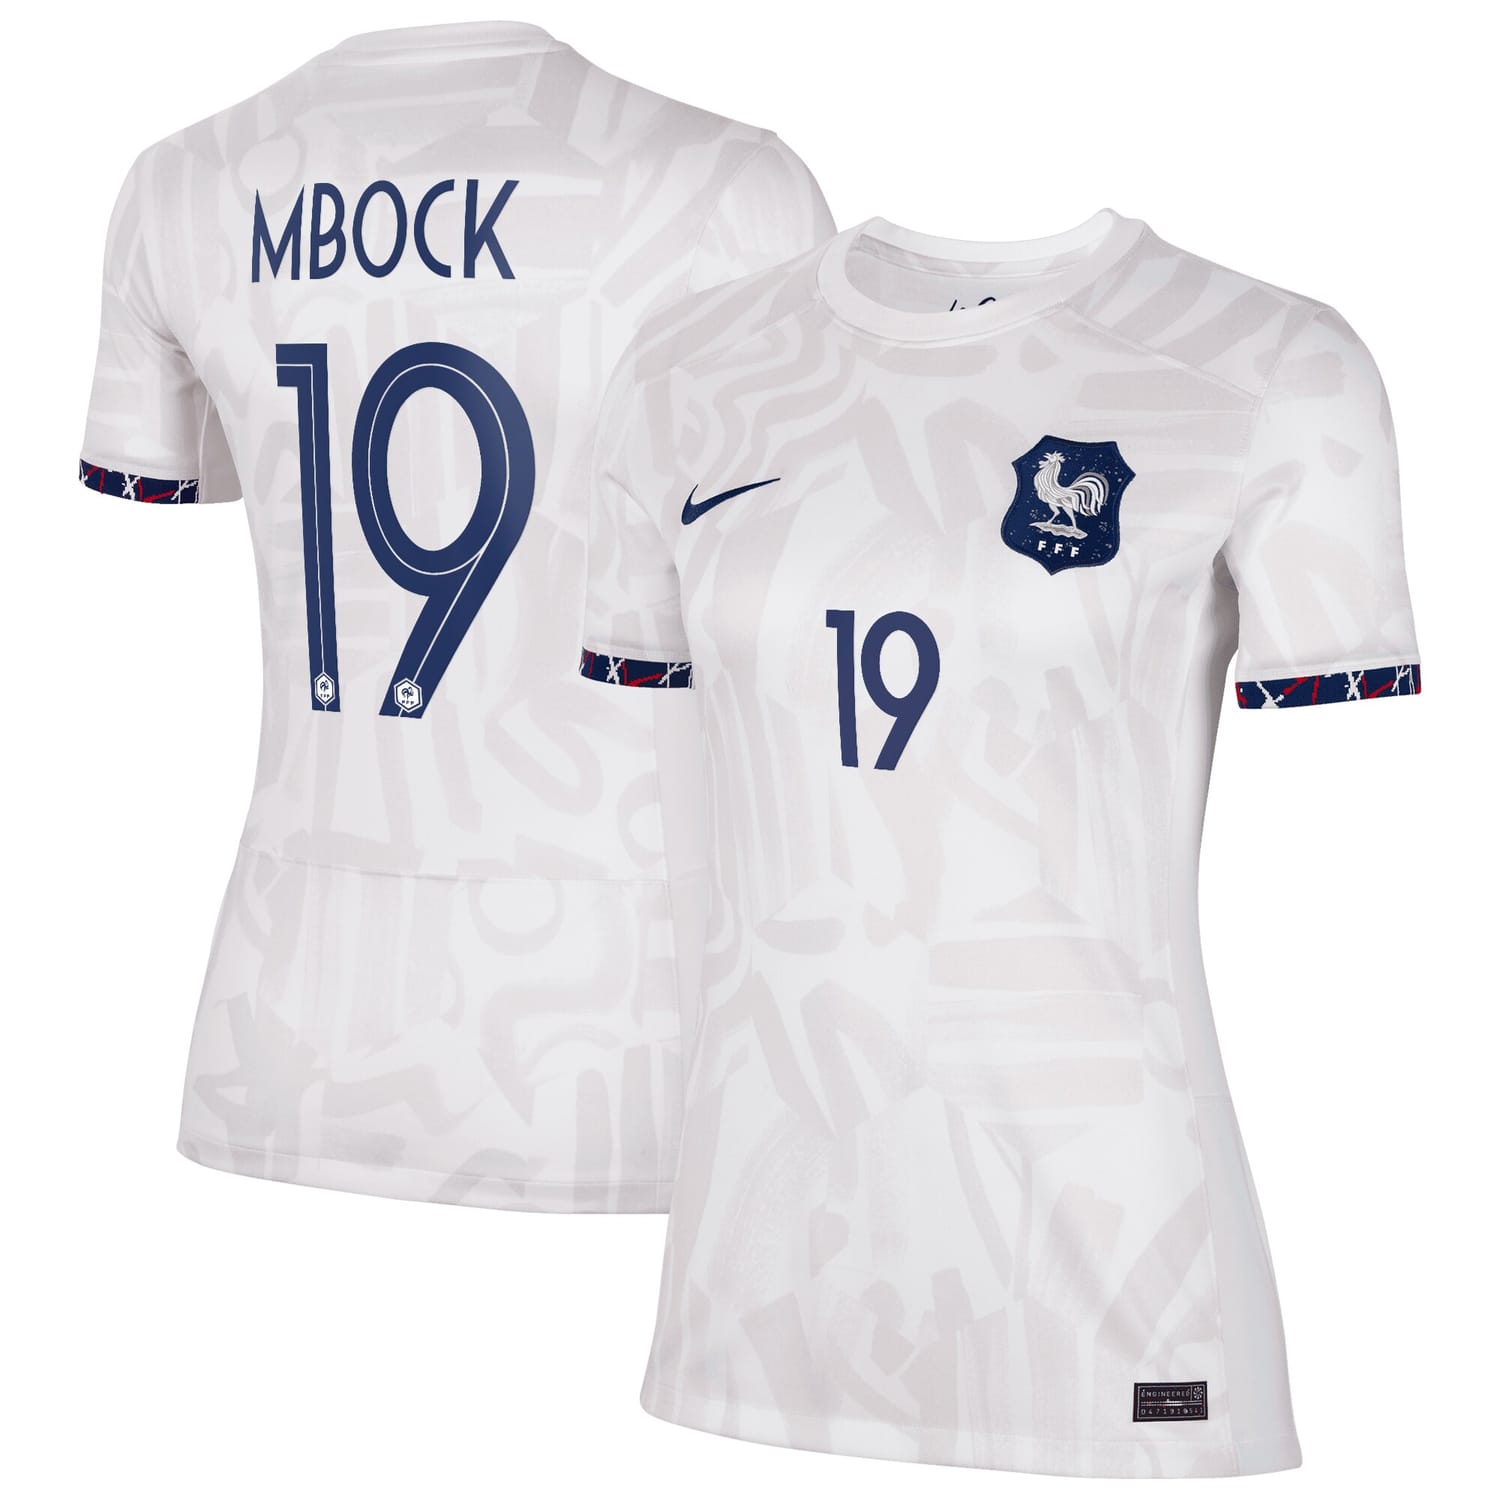 France National Team Away Jersey Shirt 2023-24 player Griedge Mbock 19 printing for Women